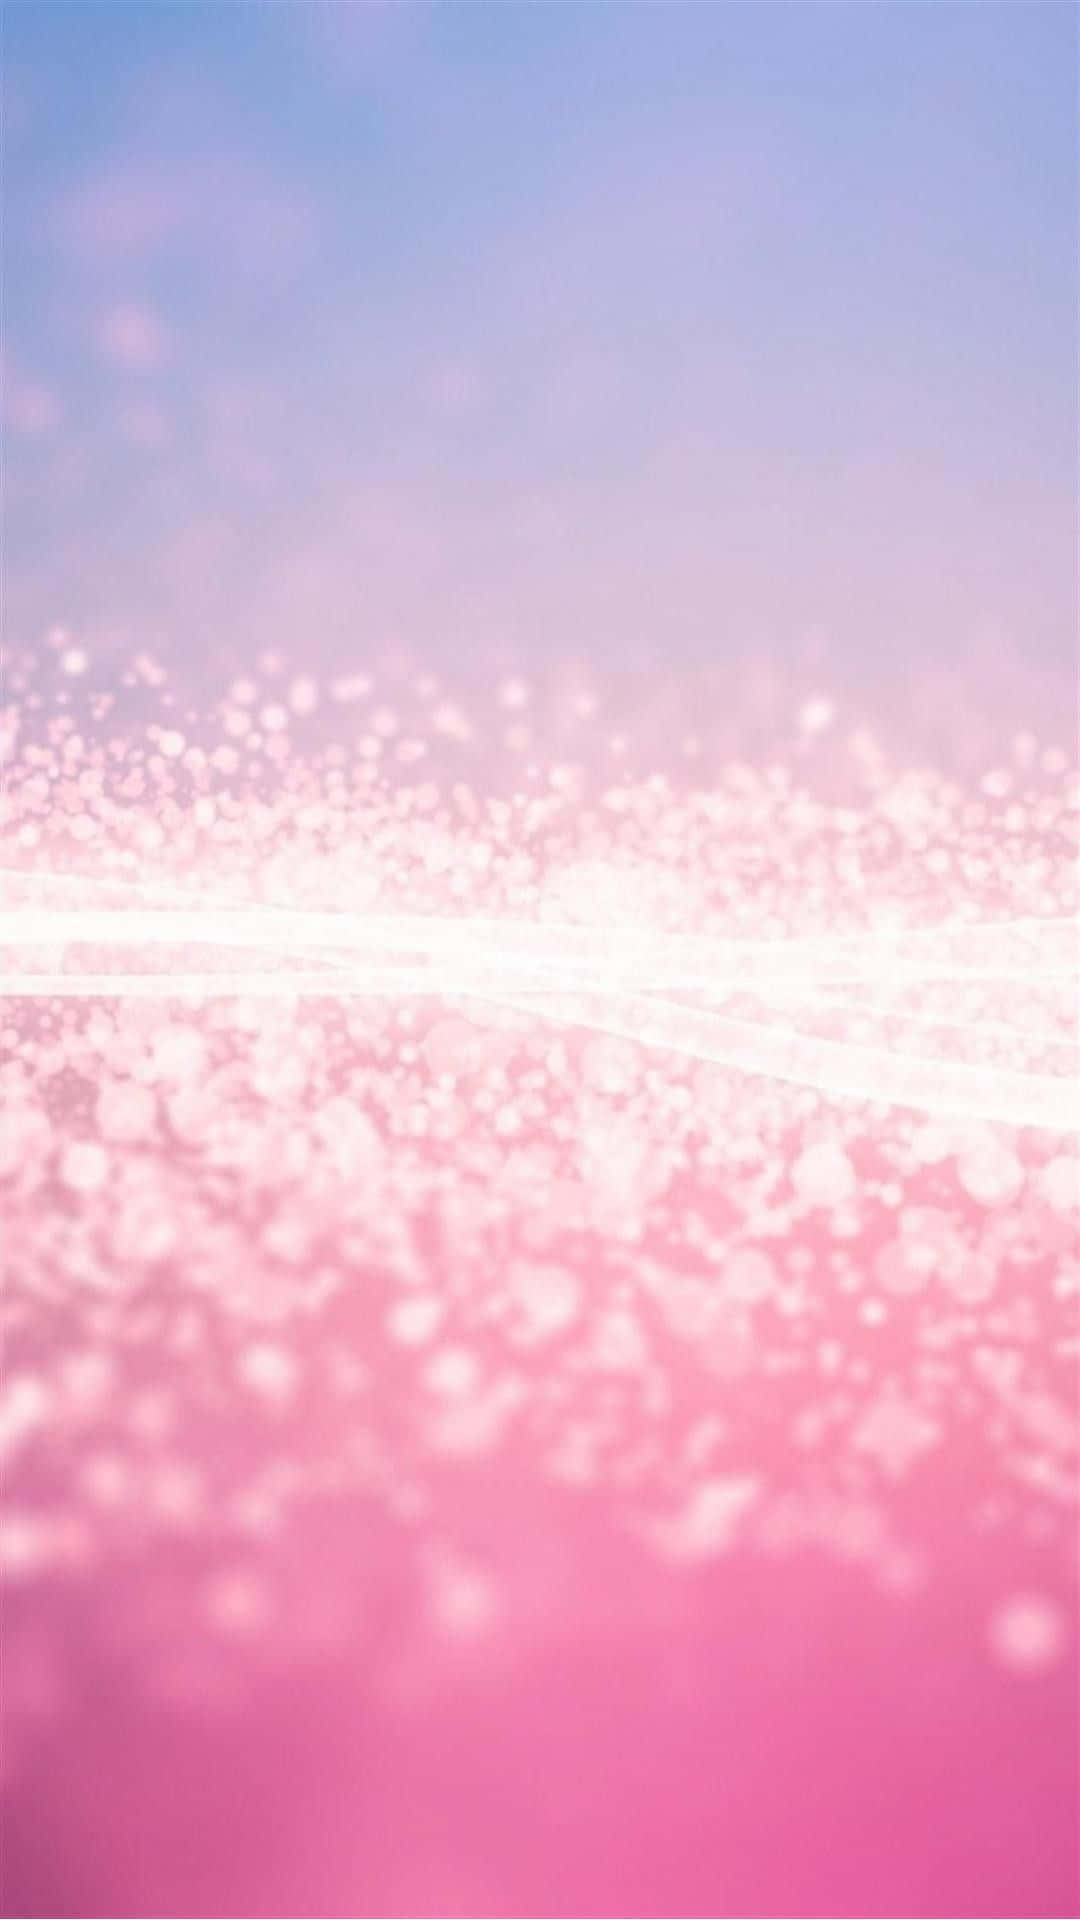 Rose Gold iPhone 5 Glowing Stardust Wallpaper